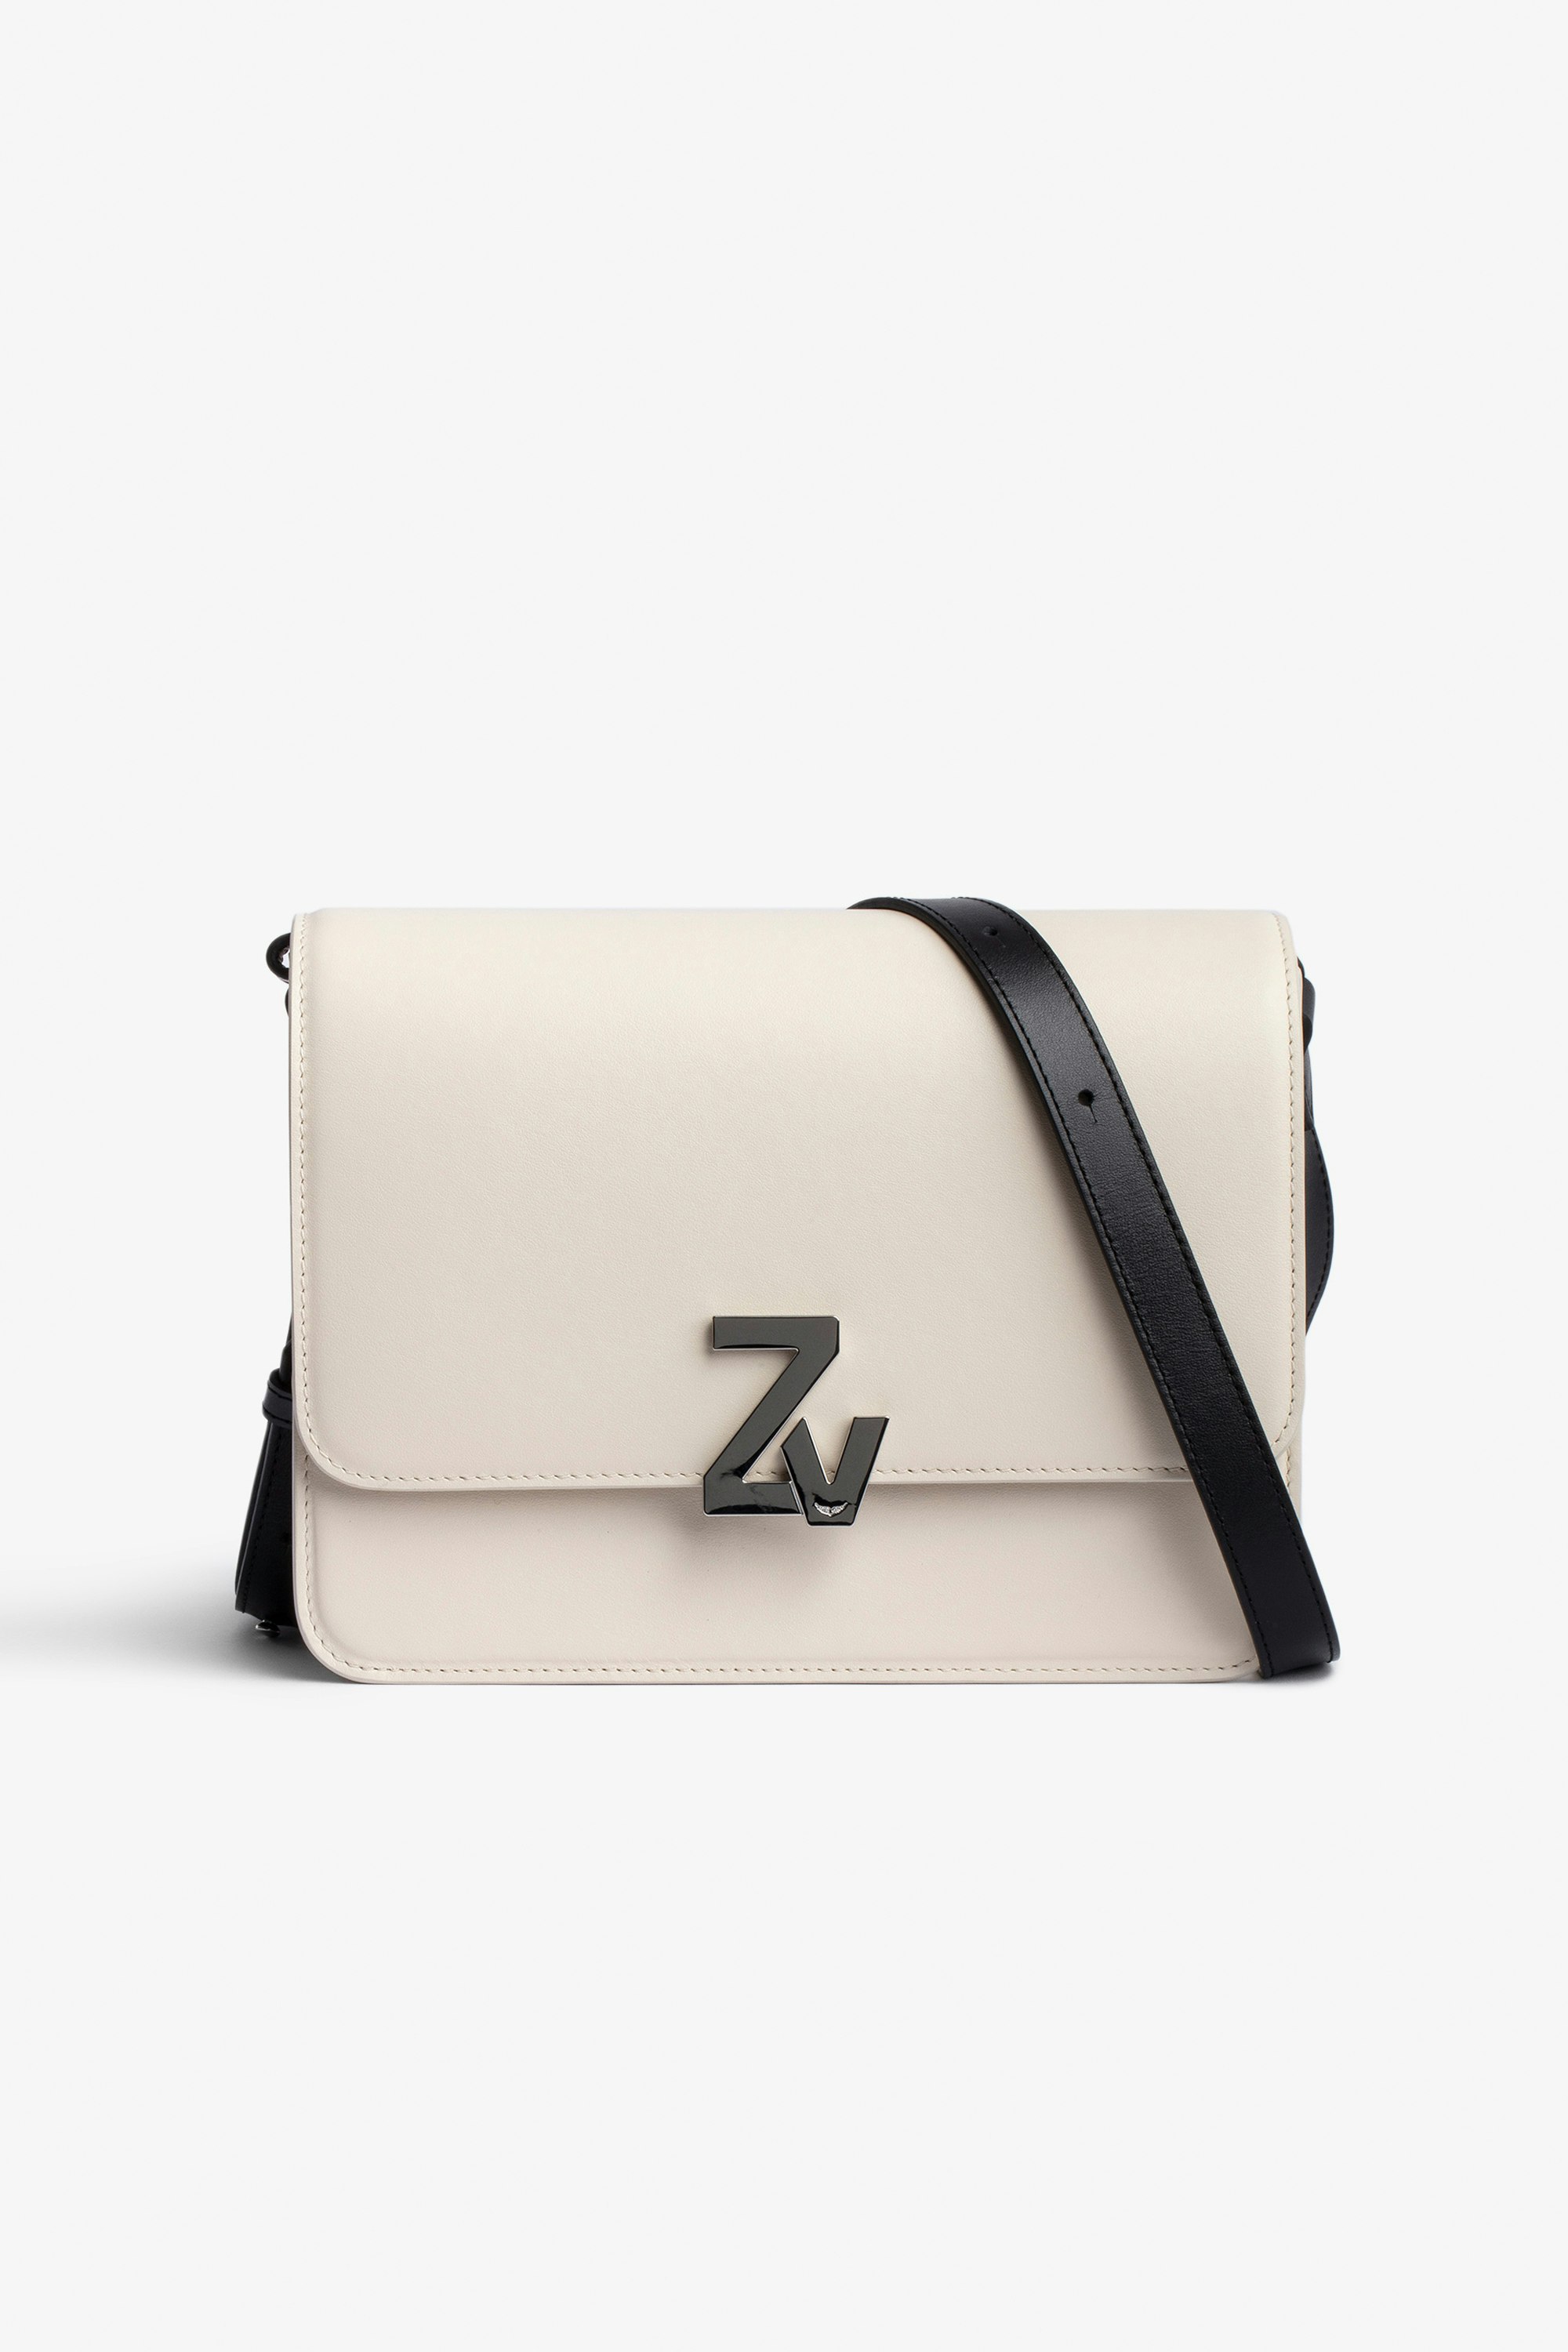 ZV Initiale Le City Bag Women’s Le City ZV Initiale bag in smooth leather